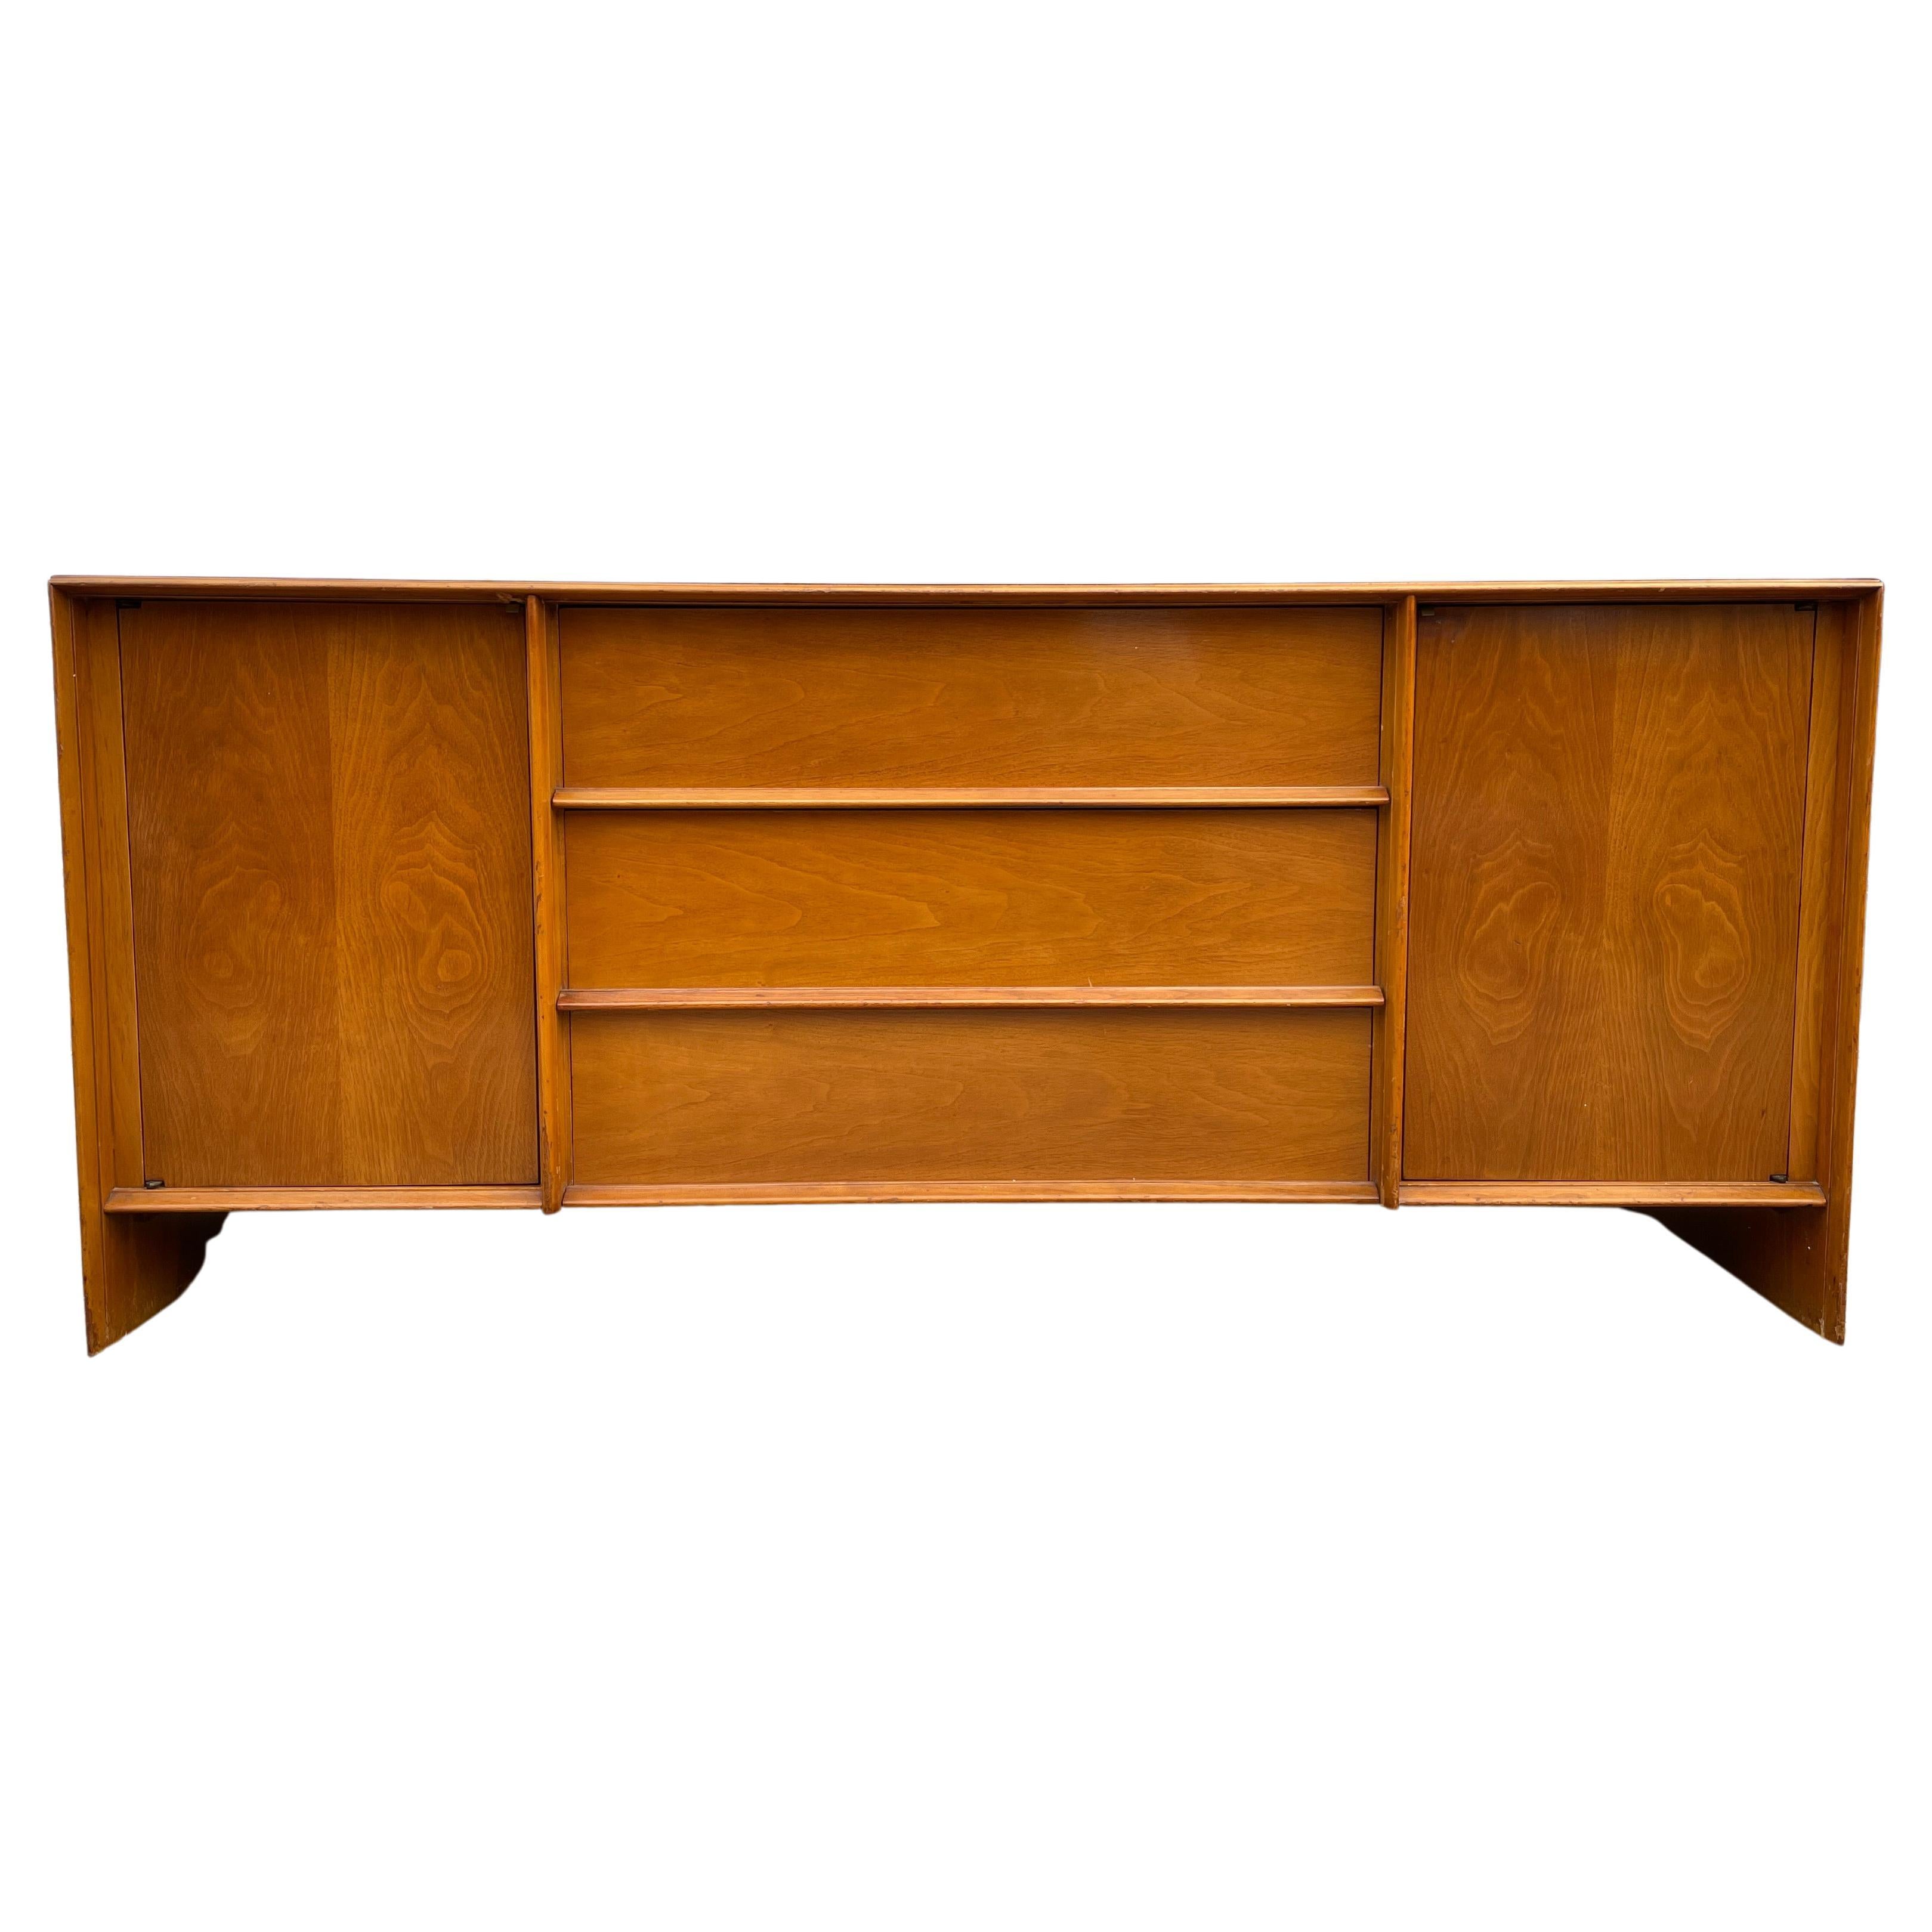 Beautiful 3 drawer Credenza sideboard by T.H. Robsjohn-Gibbings for Widdicomb